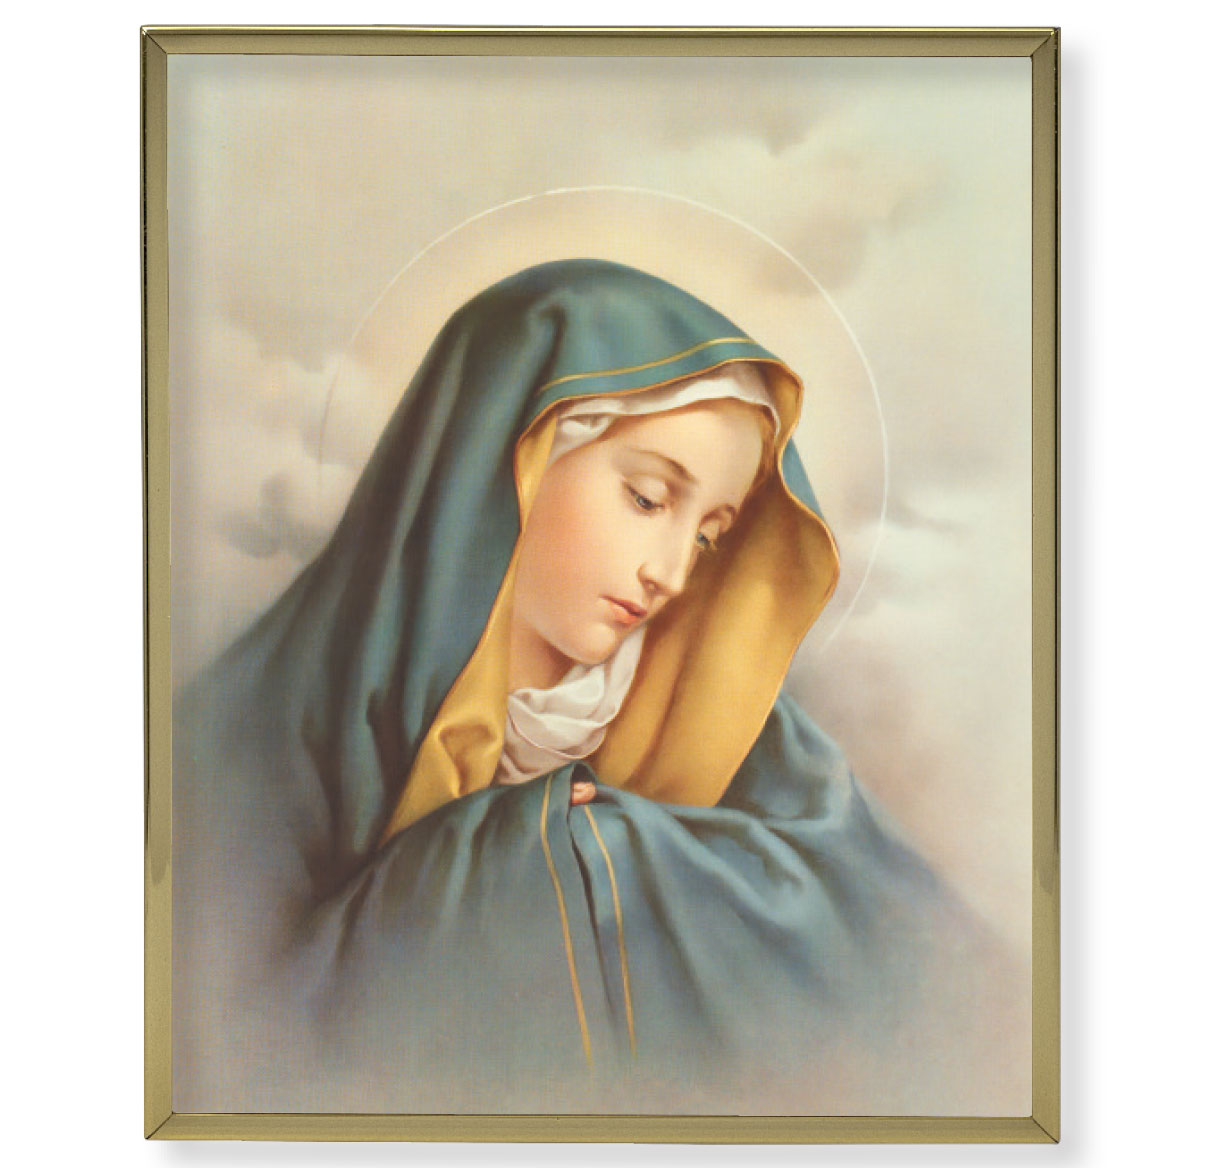 Our Lady of Sorrows Gold Framed Plaque Art